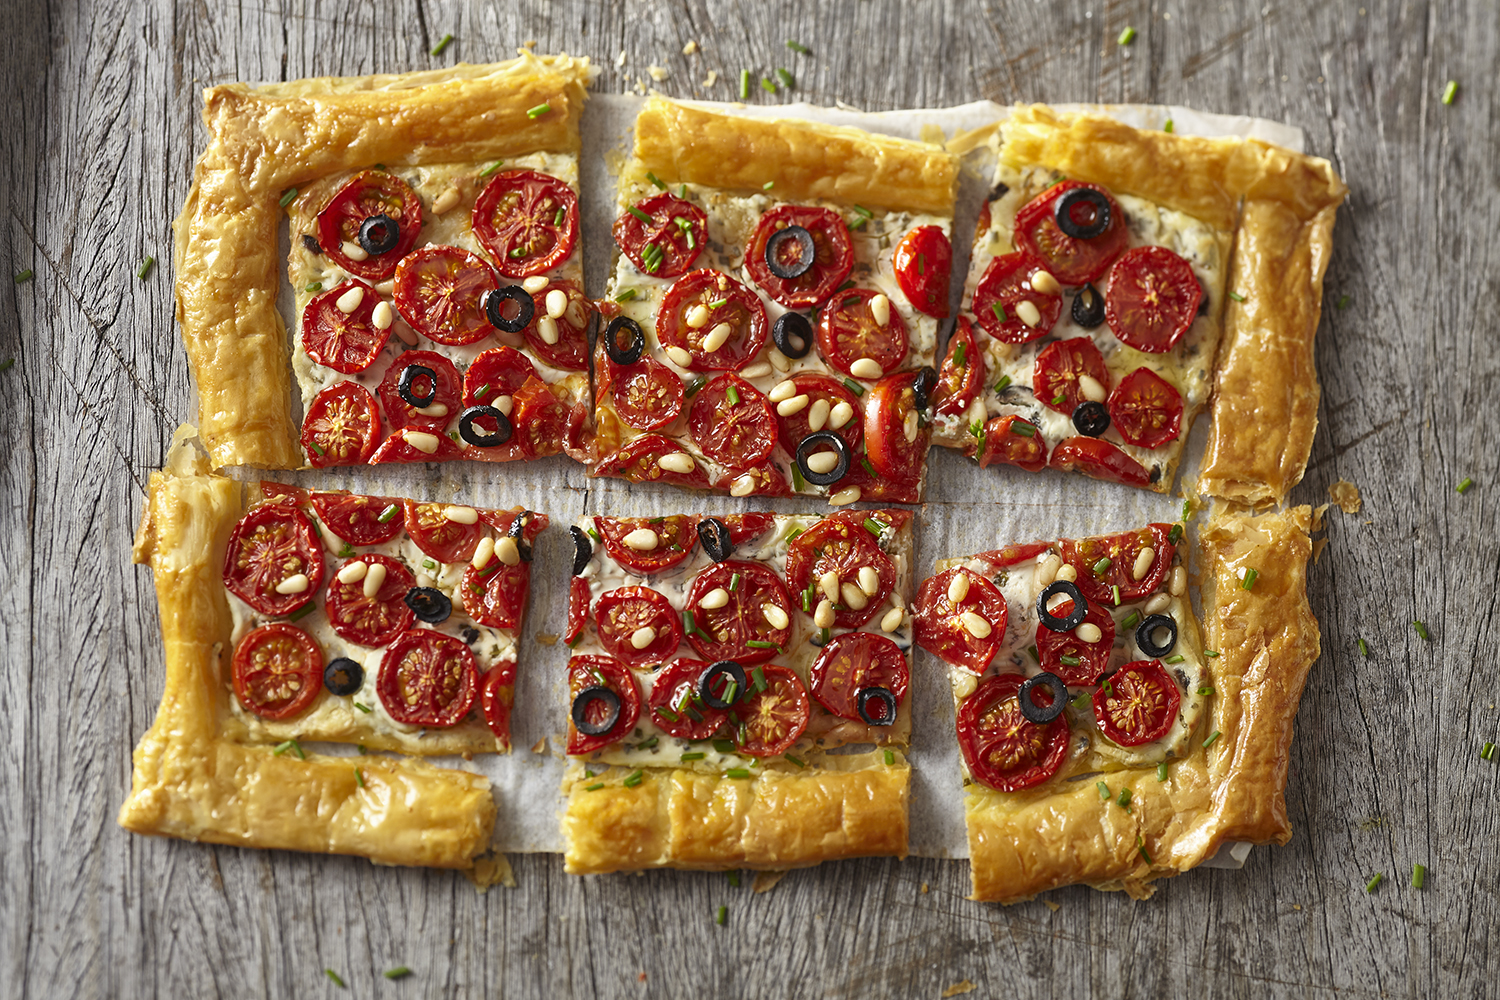 Slices for pizza-Prominent tomatoes